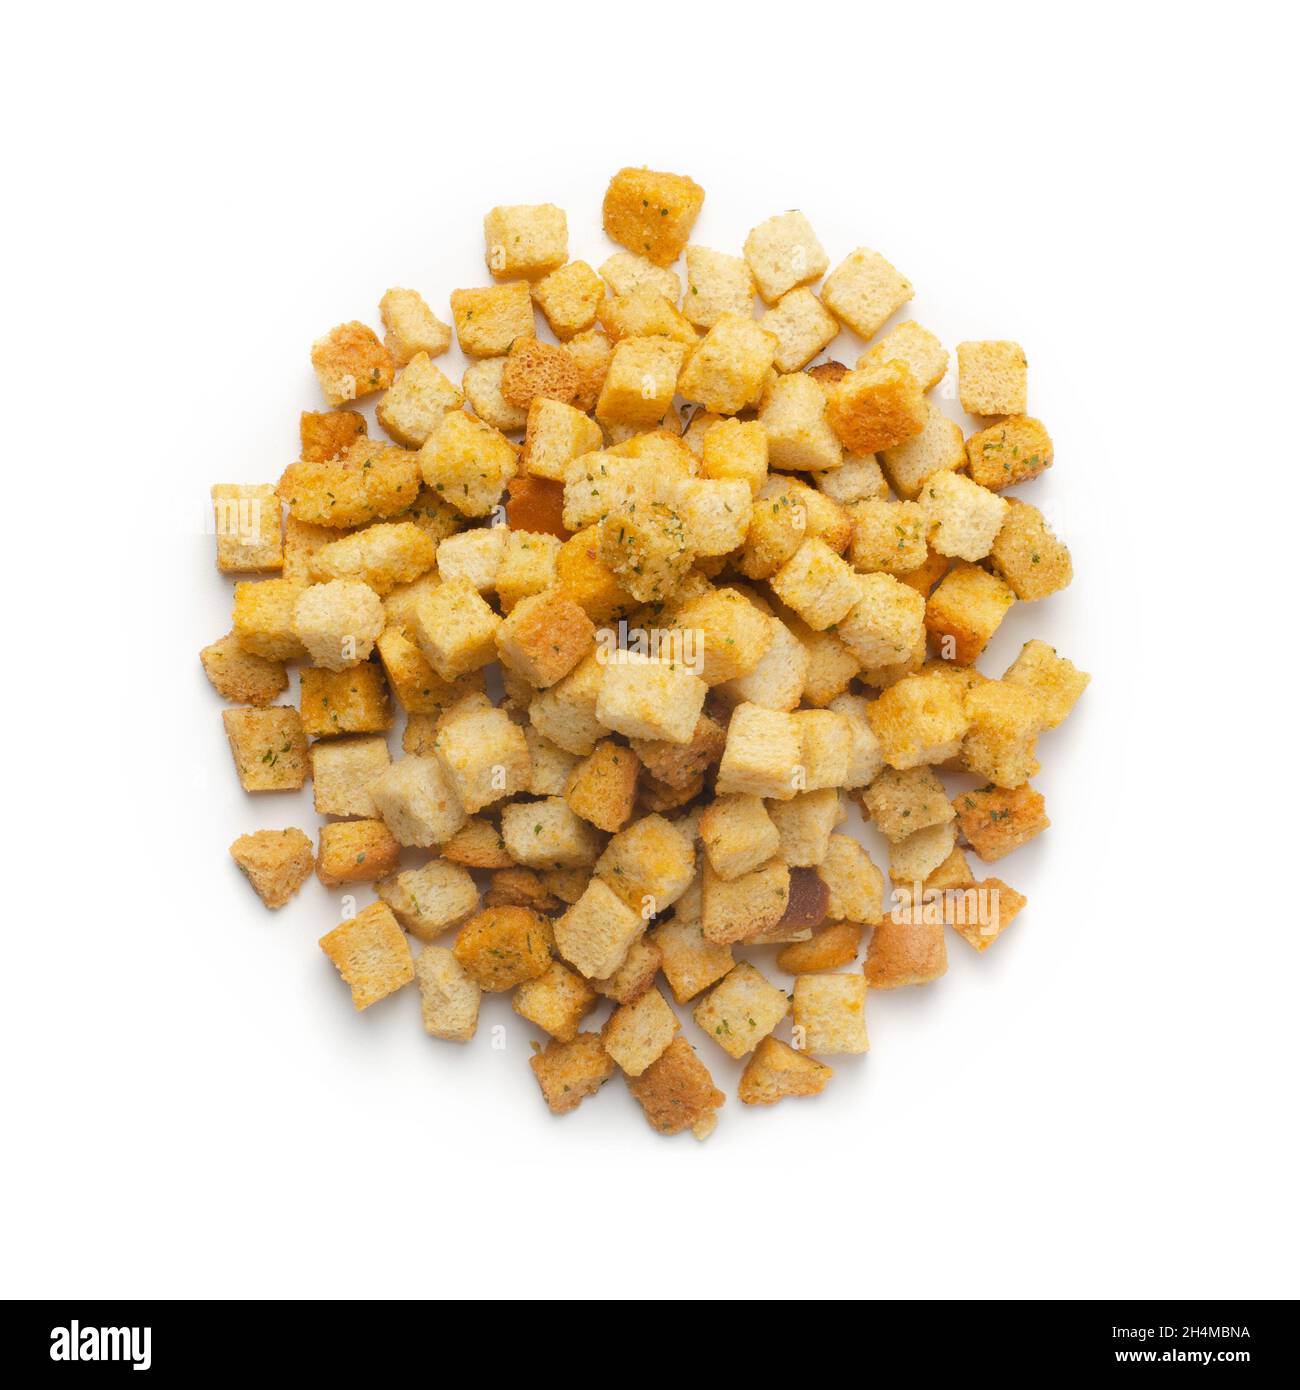 Pile of garlic white bread croutons isolated over the white background Stock Photo